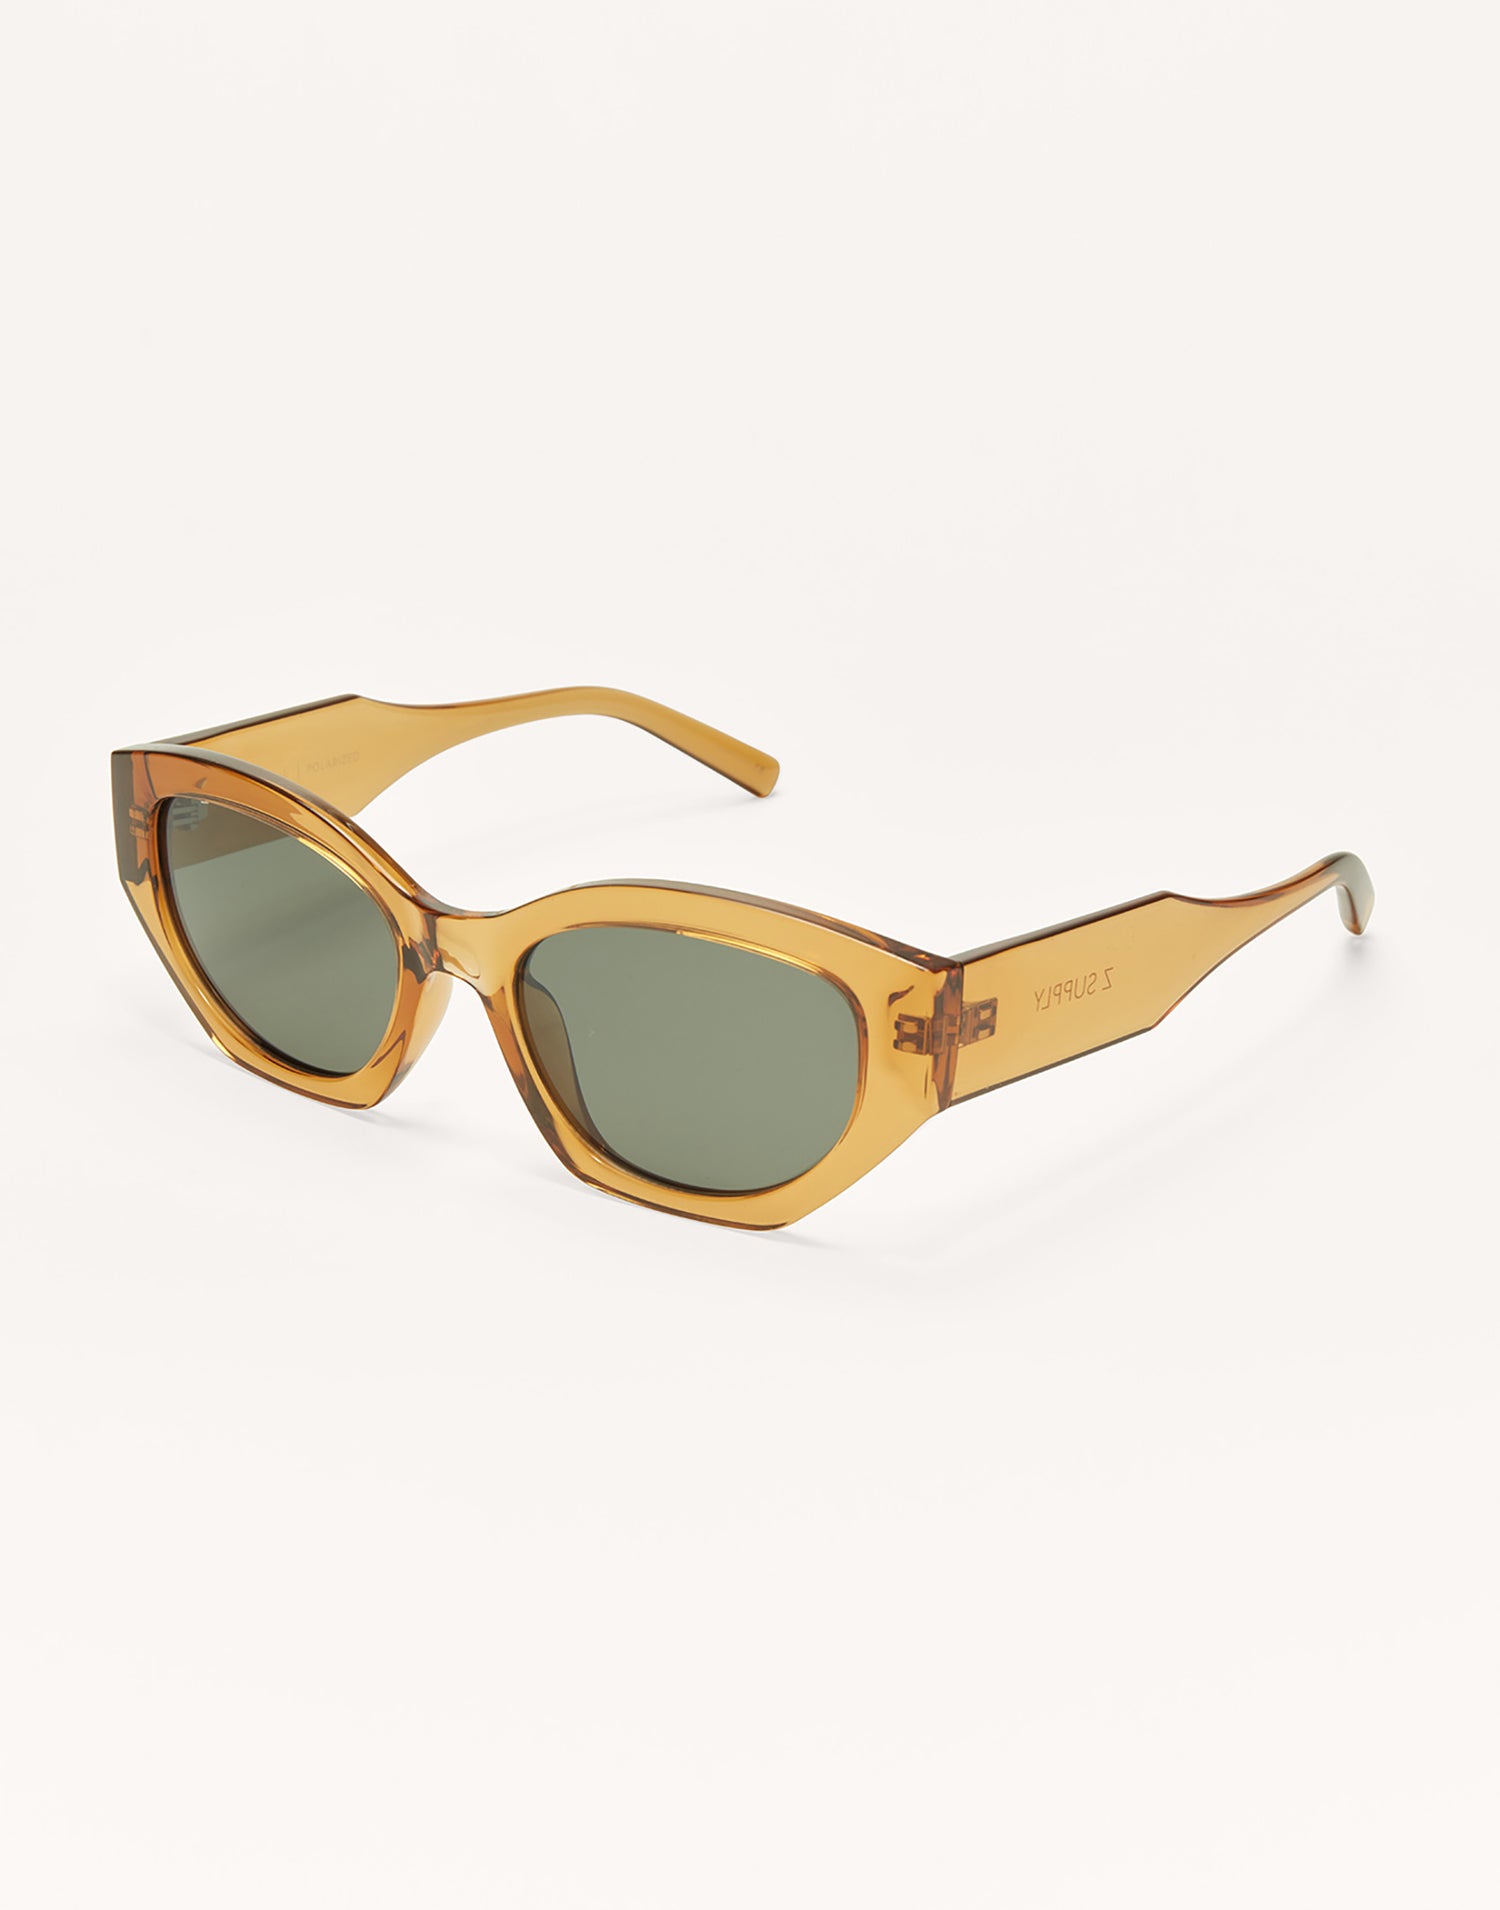 Love Sick Sunglasses by Z Supply in Gold - Angled View